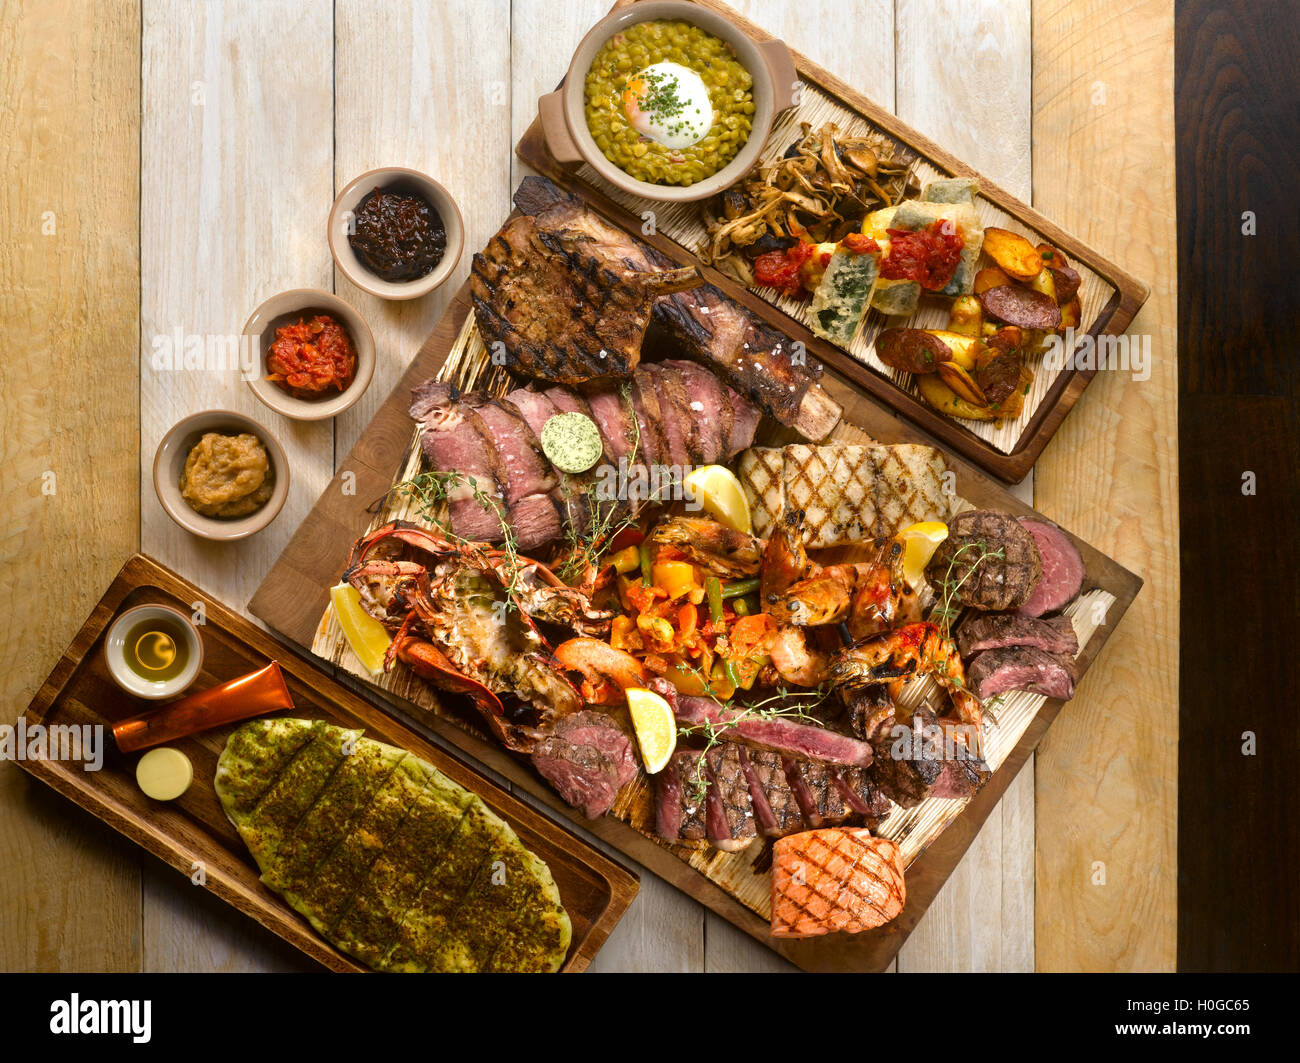 Osia Steak Seafood Grill with beef, pork, bacon, ham, sausages, lemon, herbs and wasabi on wooden table Stock Photo